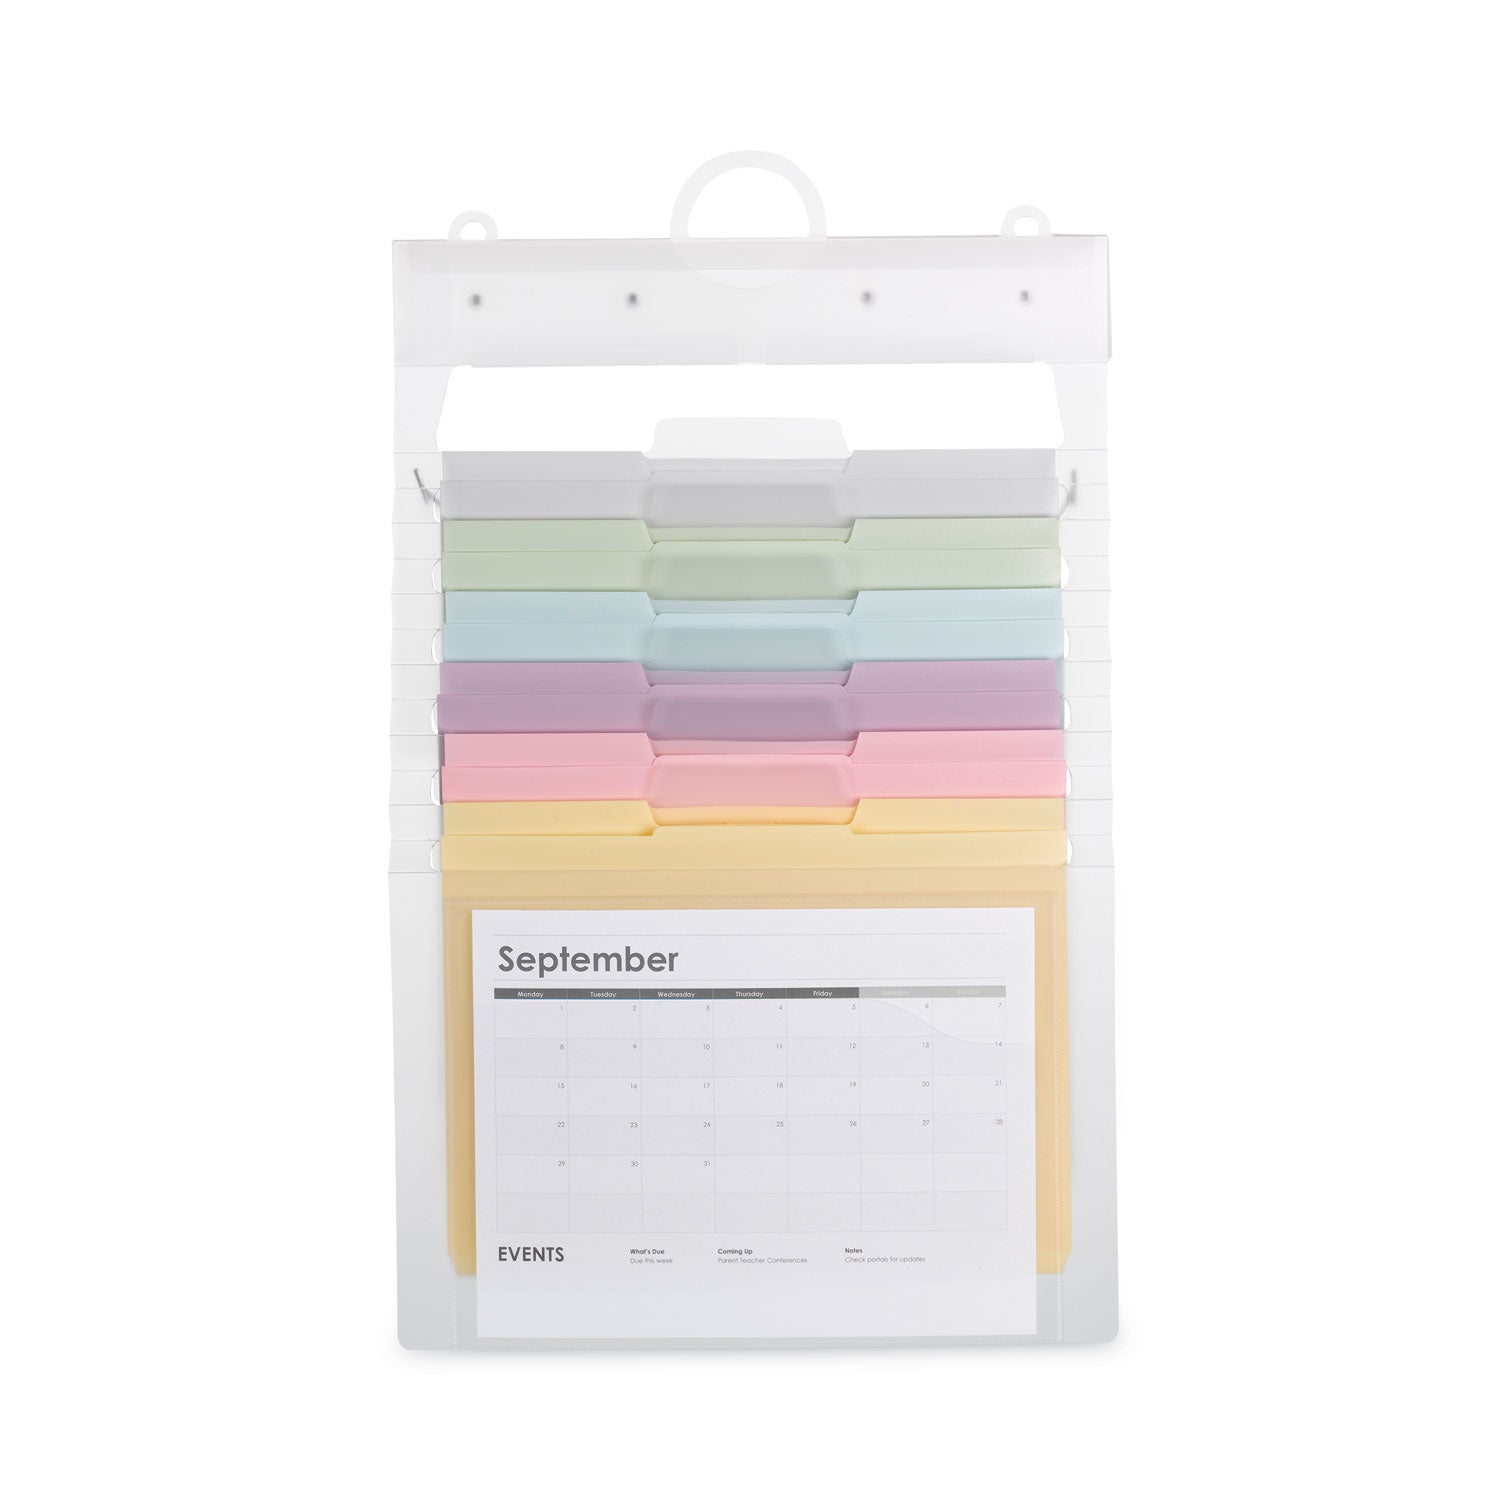 cascading-wall-organizer-6-sections-letter-size-1425-x-2425-blue-clear-gray-green-orange-pink-purple_smd92064 - 2